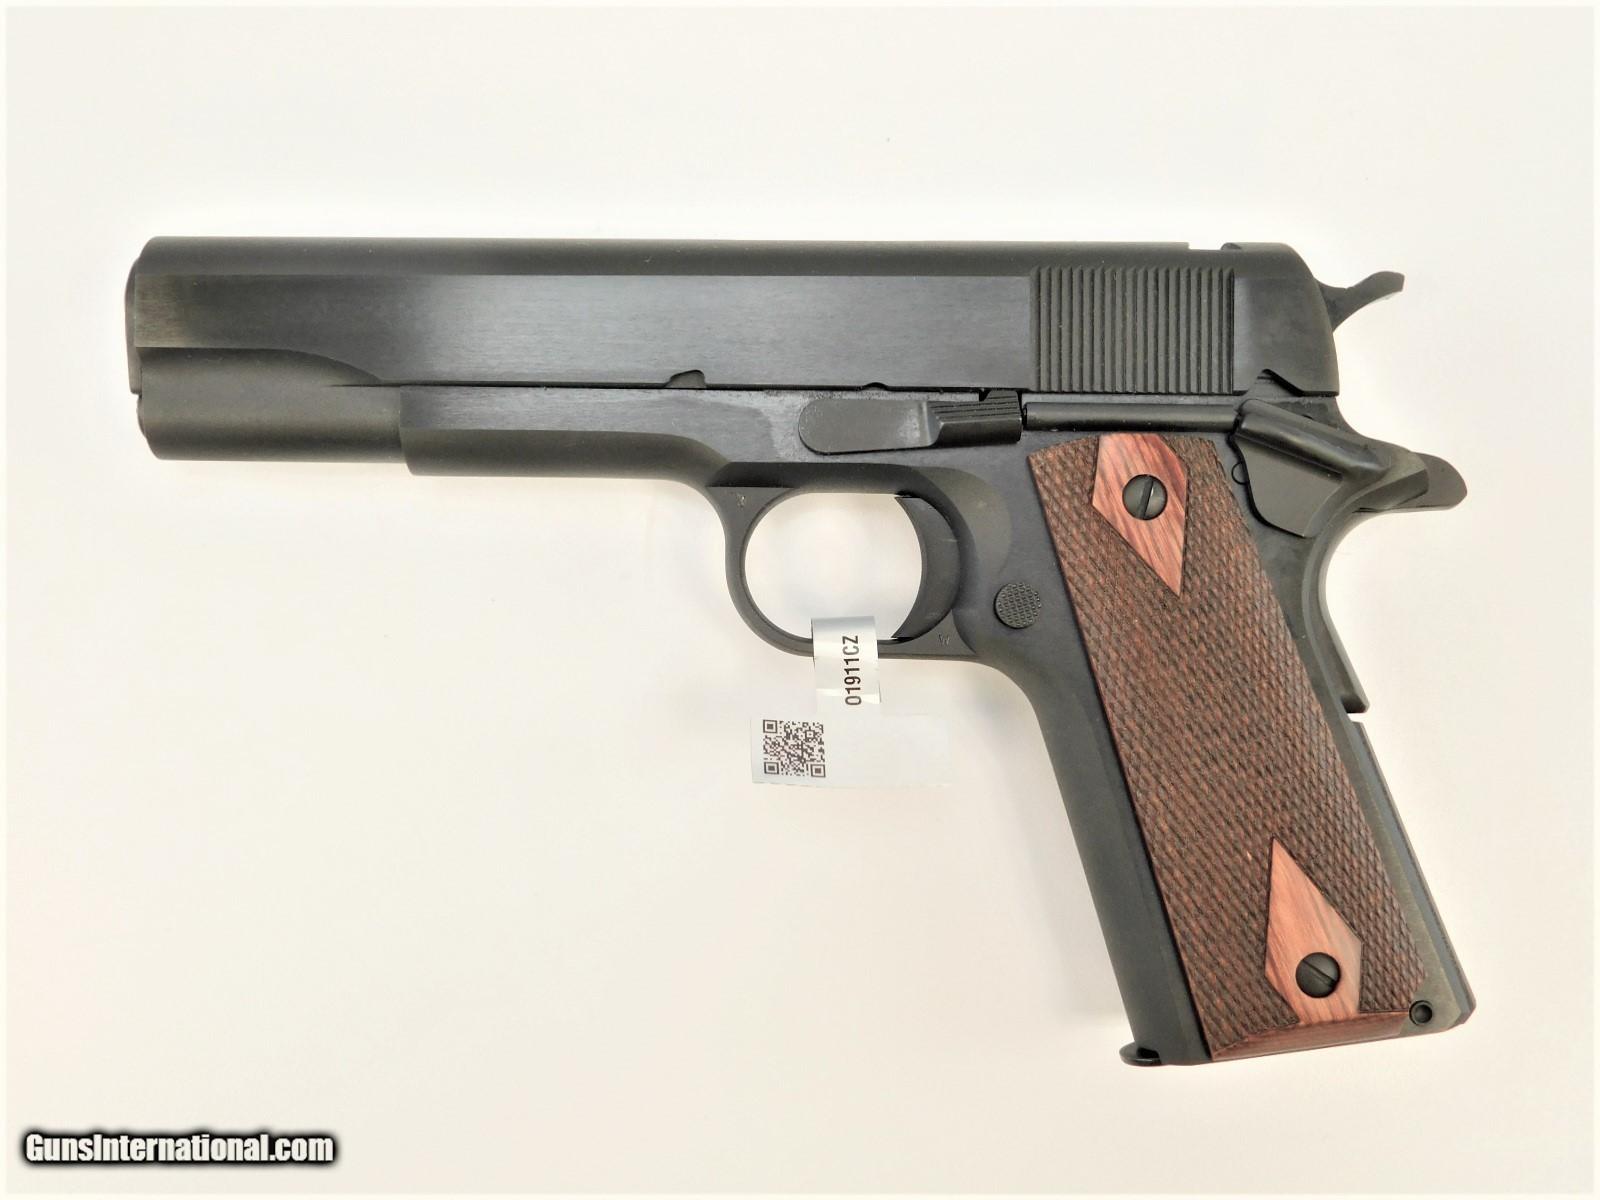 Colt-Series-70-Government-Model-1911-Blued-5inch-45-ACP-No-Rollmarks_101478339_23034_F53A635C4747DB57.JPG